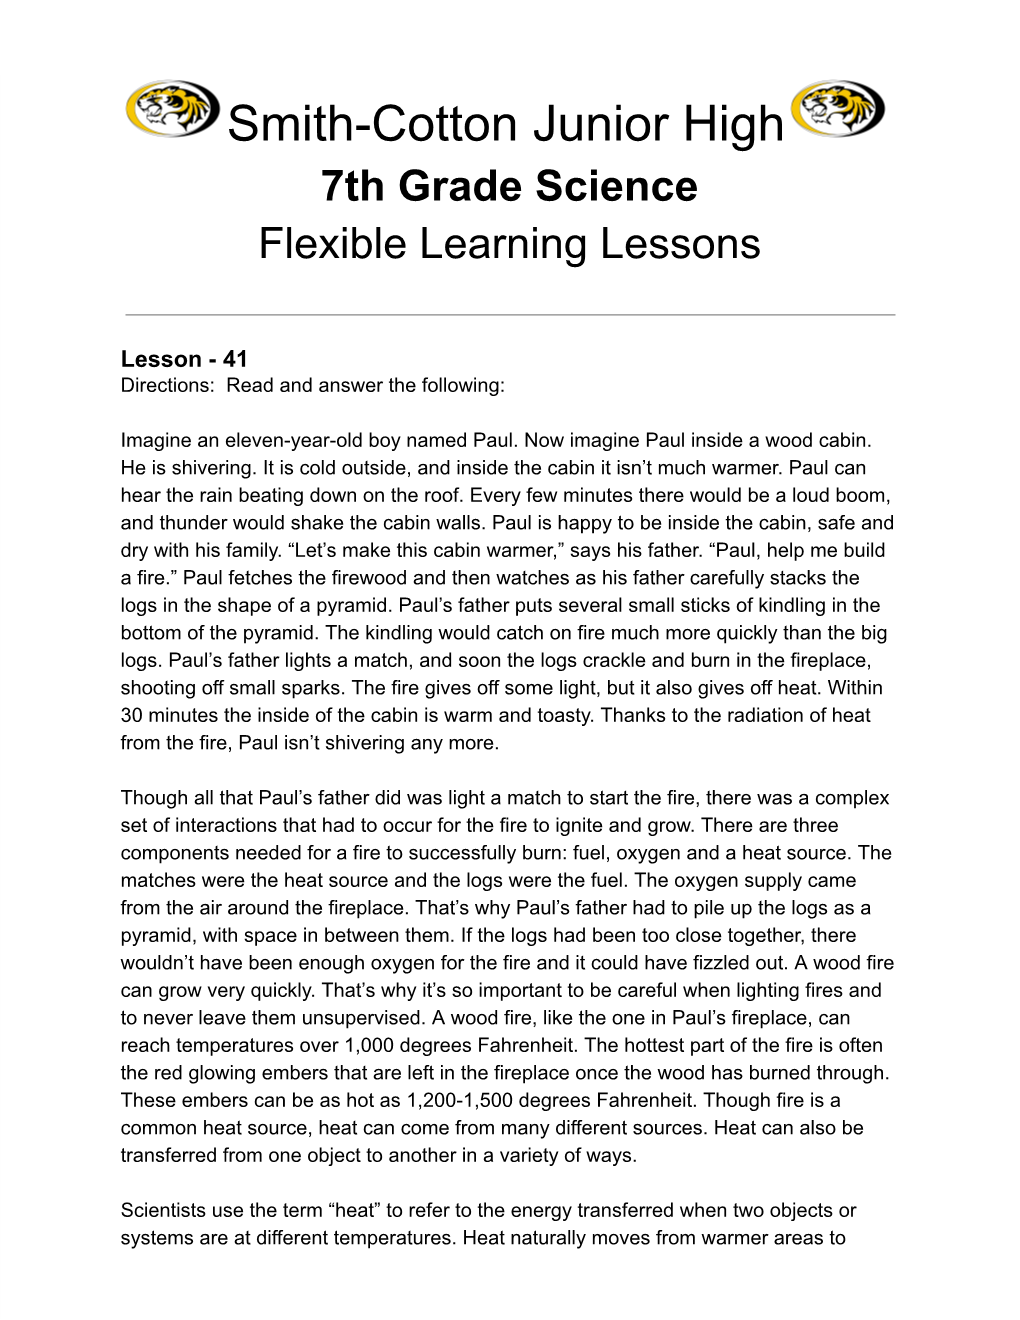 7Th Grade Science Flexible Learning Lessons